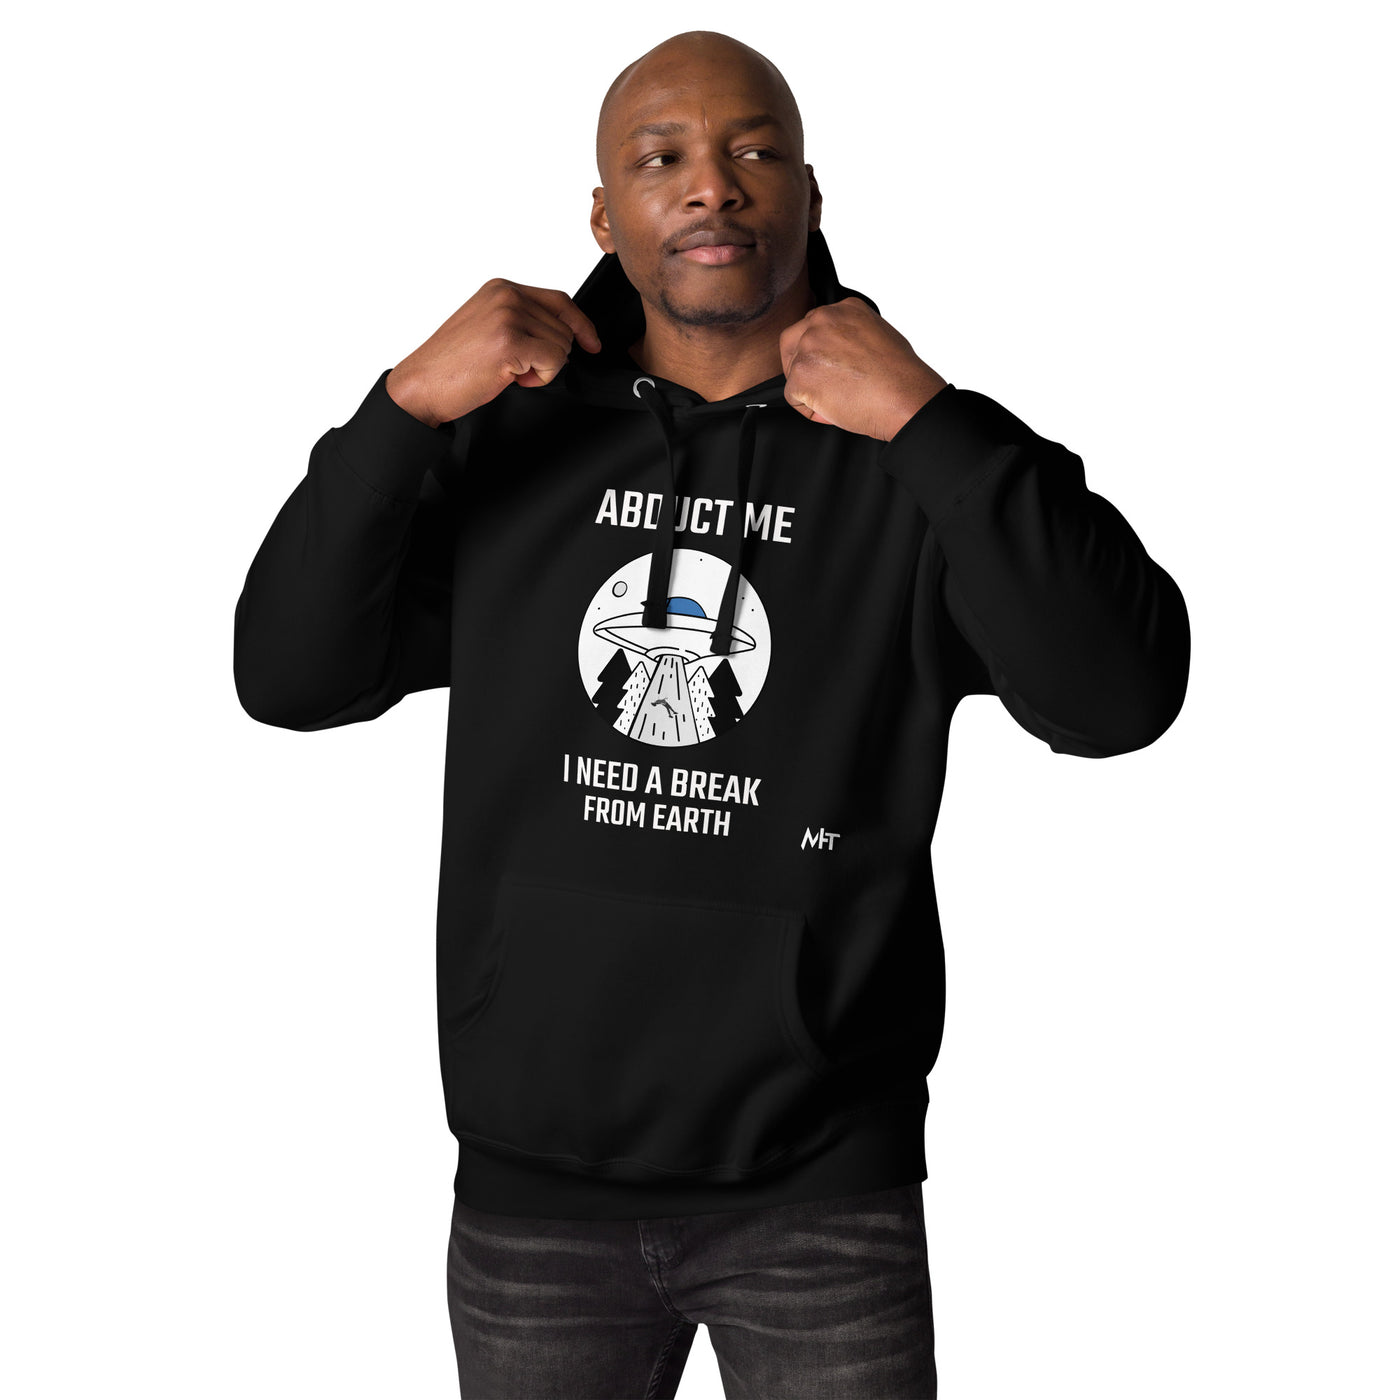 Abduct me, I need a break from Earth - Unisex Hoodie